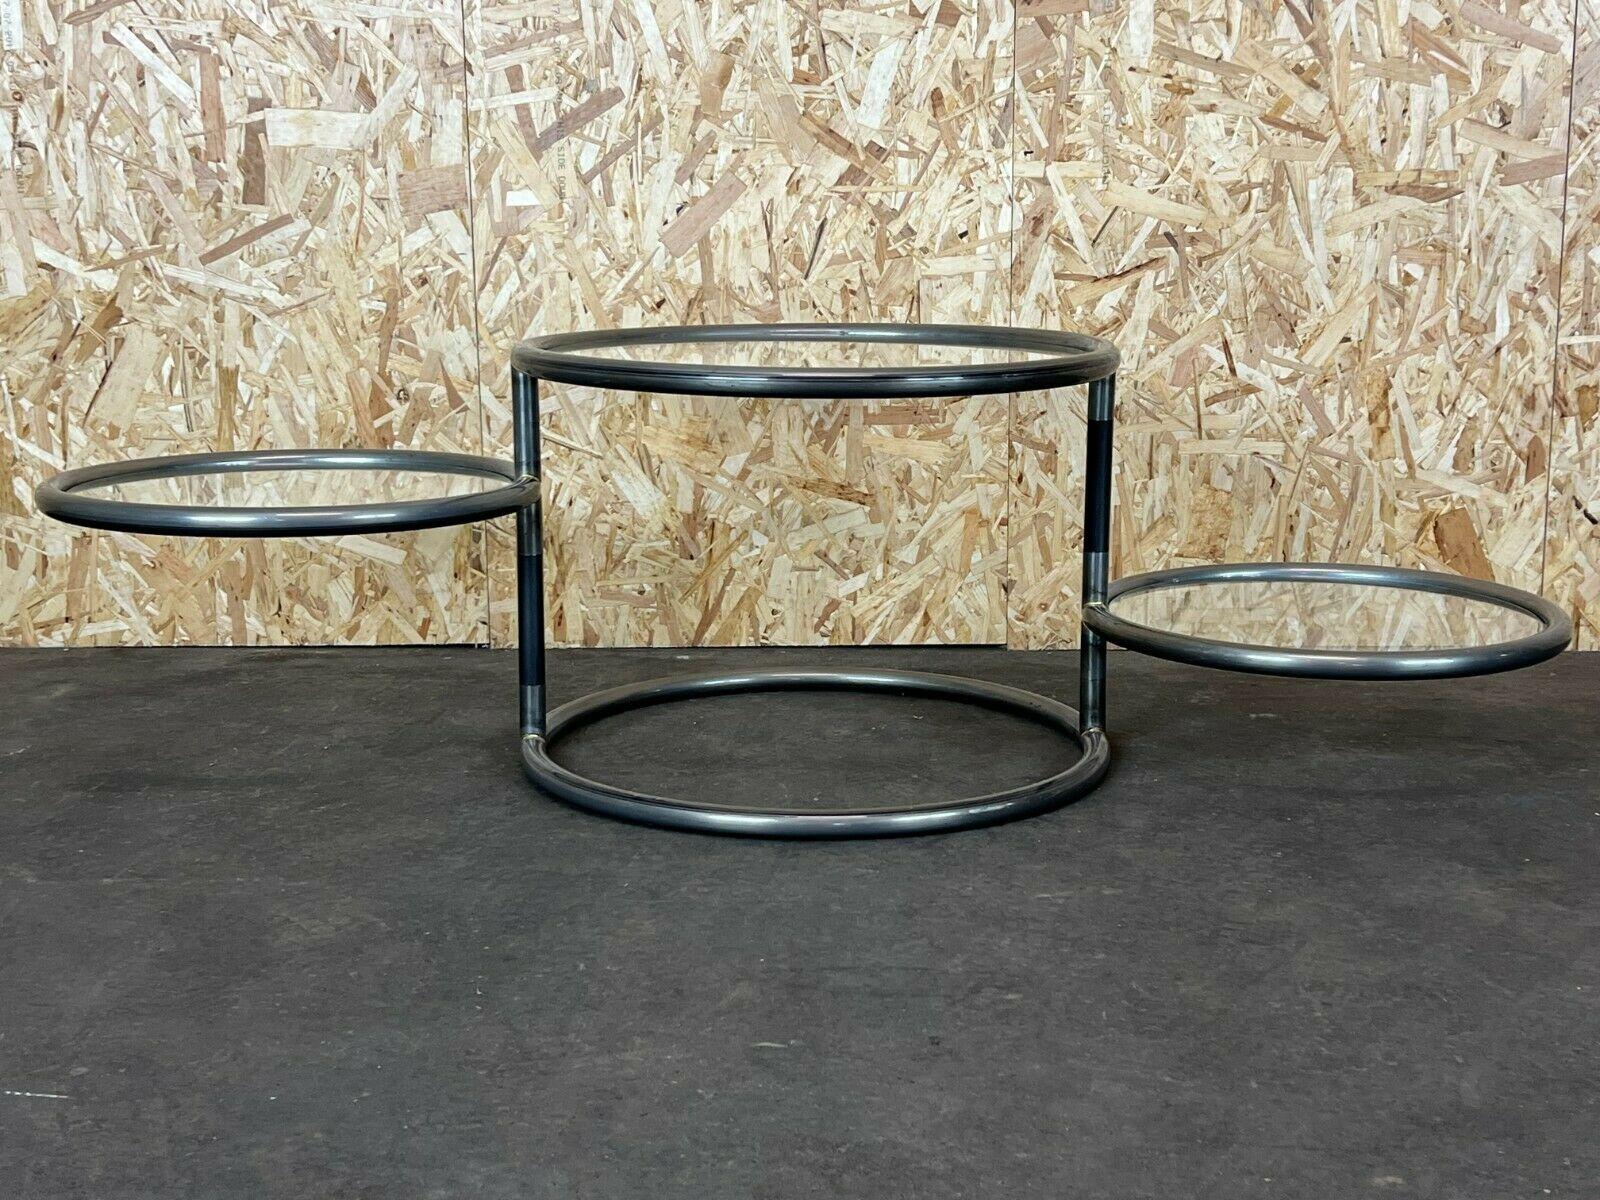 60s 70s coffee table metal side table adjustable coffee table design 60s 70s

Object: coffee table

Manufacturer:

Condition: good - vintage

Age: around 1960-1970

Dimensions:

Diameter = 57cm
Height = 41cm

Other notes:

The